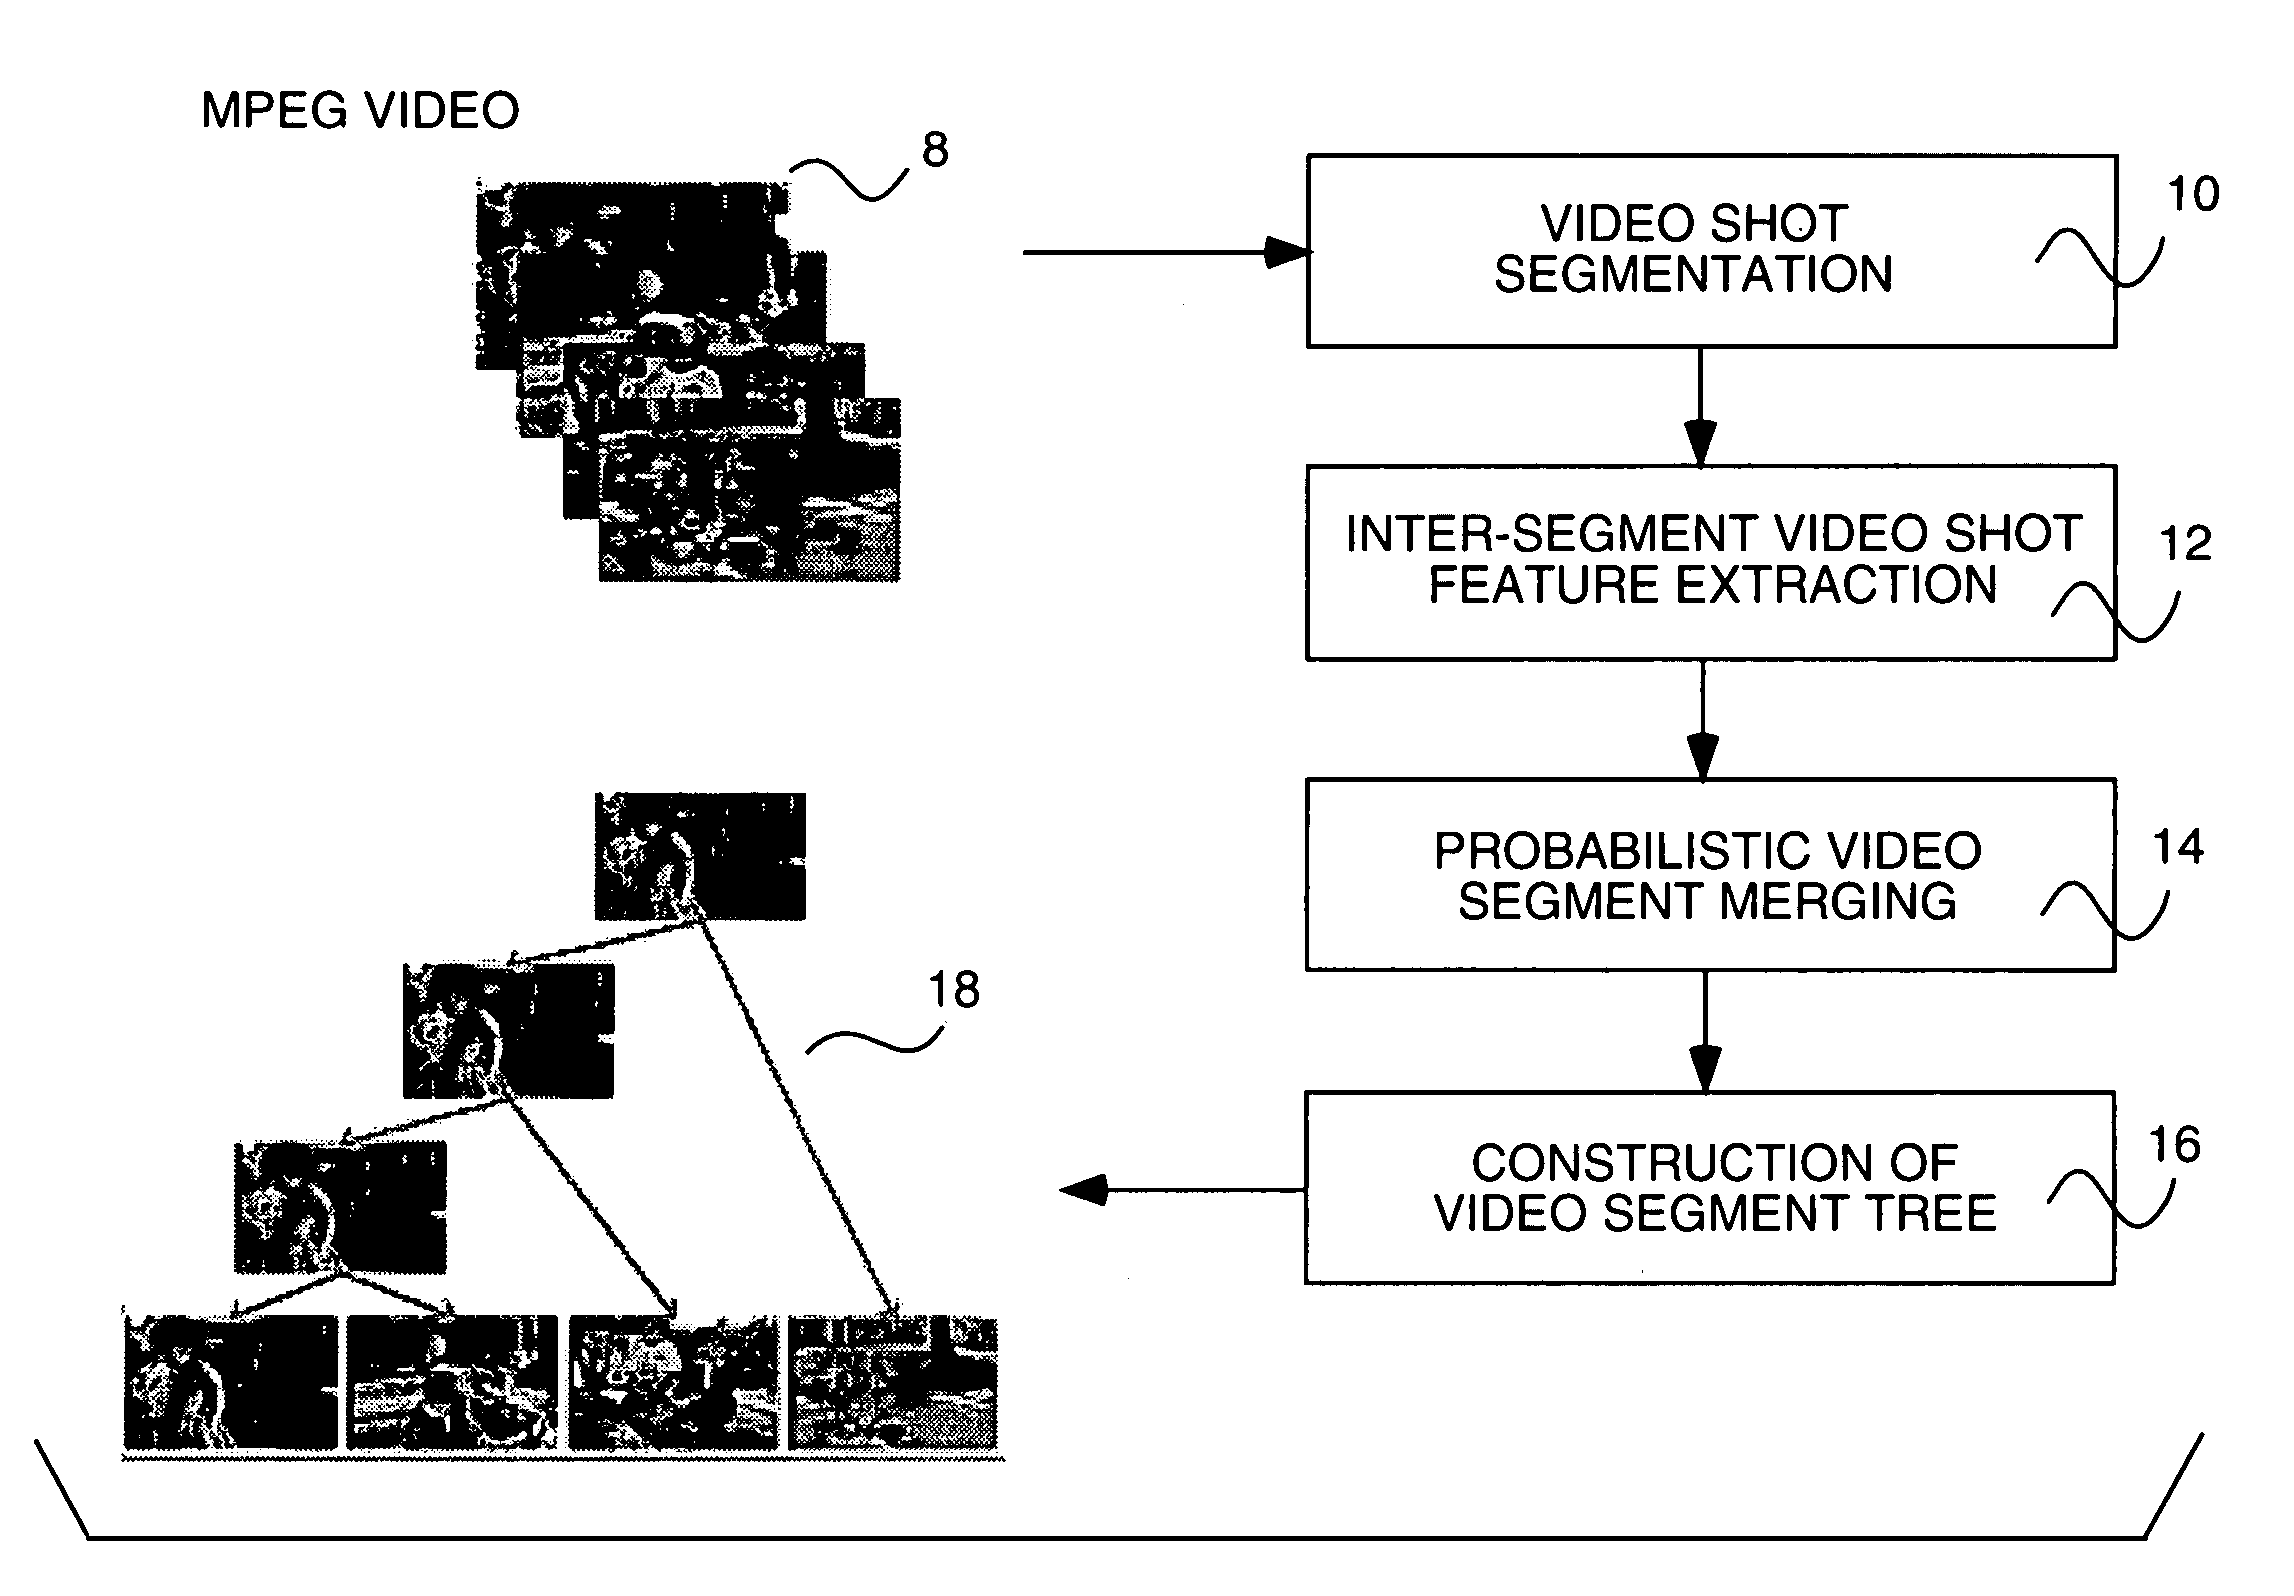 Video structuring by probabilistic merging of video segments